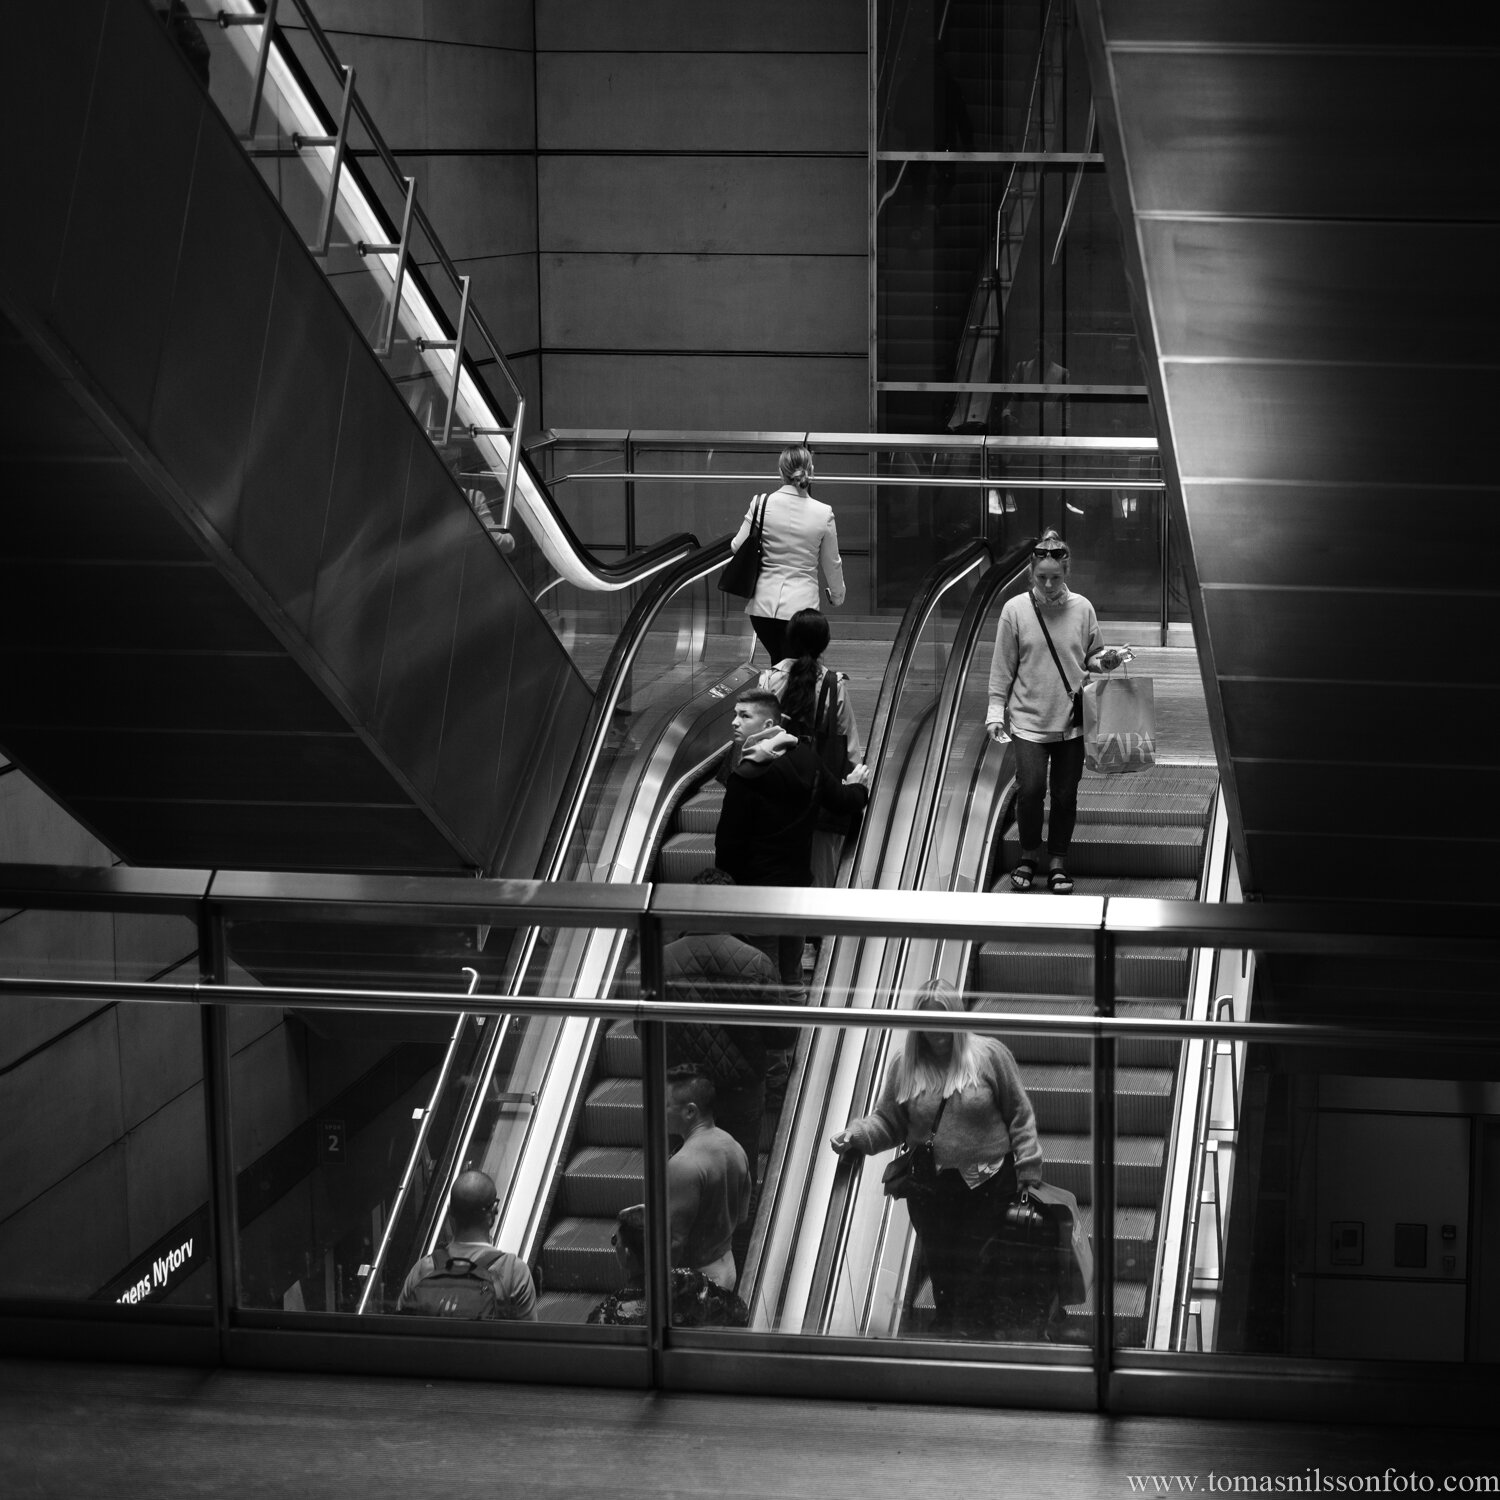 Day 244 - September 1: Upstairs, Downstairs